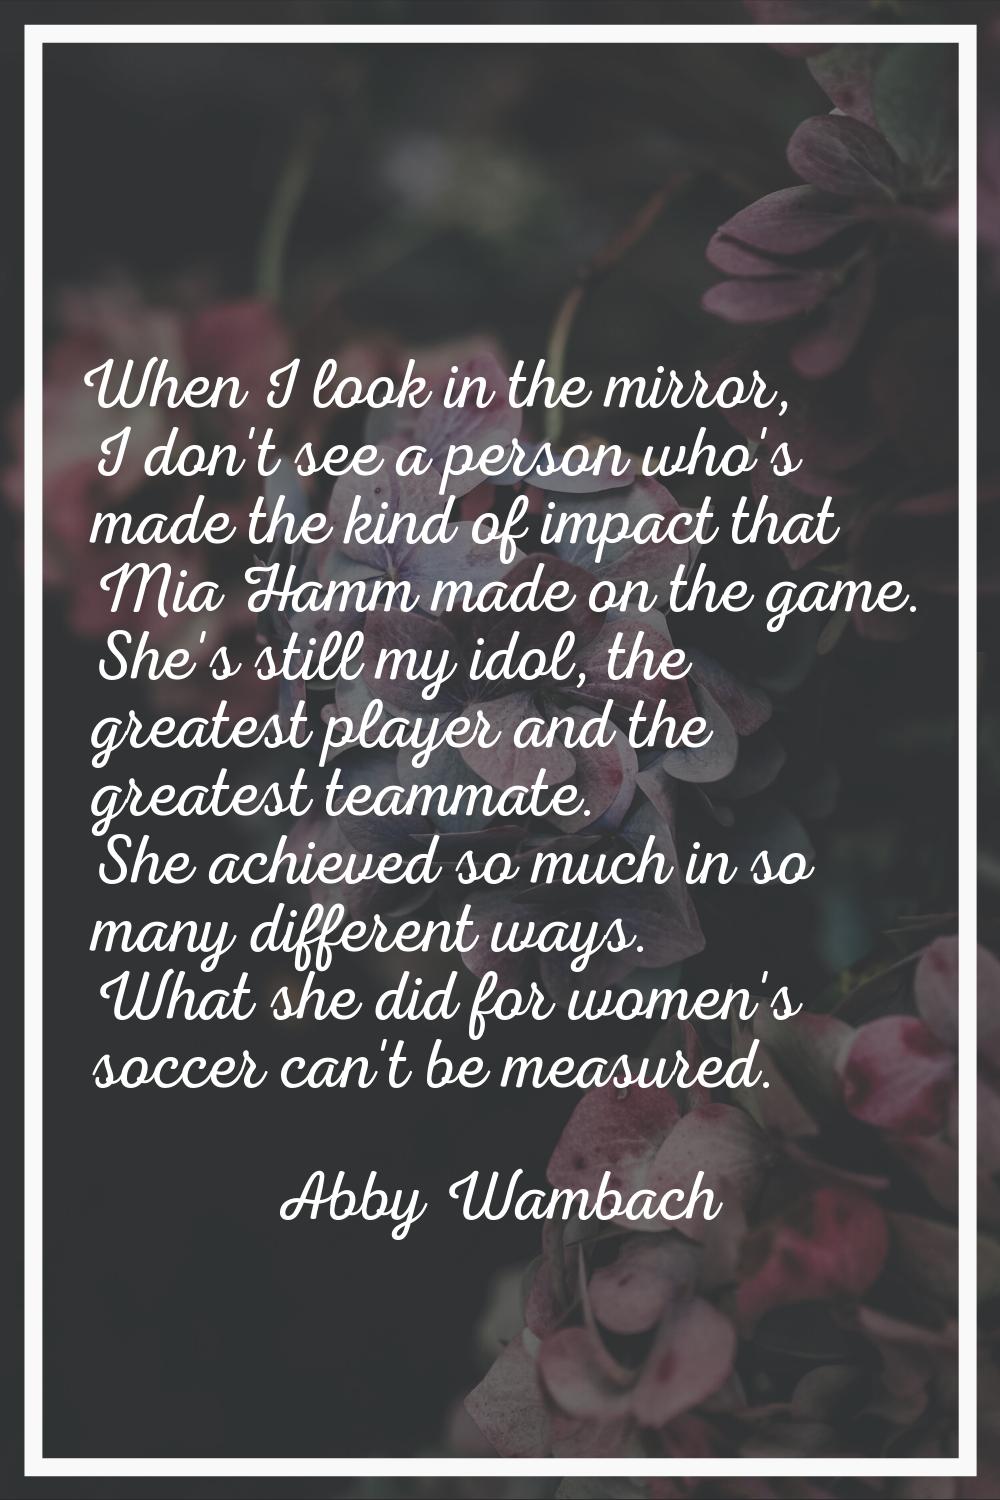 When I look in the mirror, I don't see a person who's made the kind of impact that Mia Hamm made on